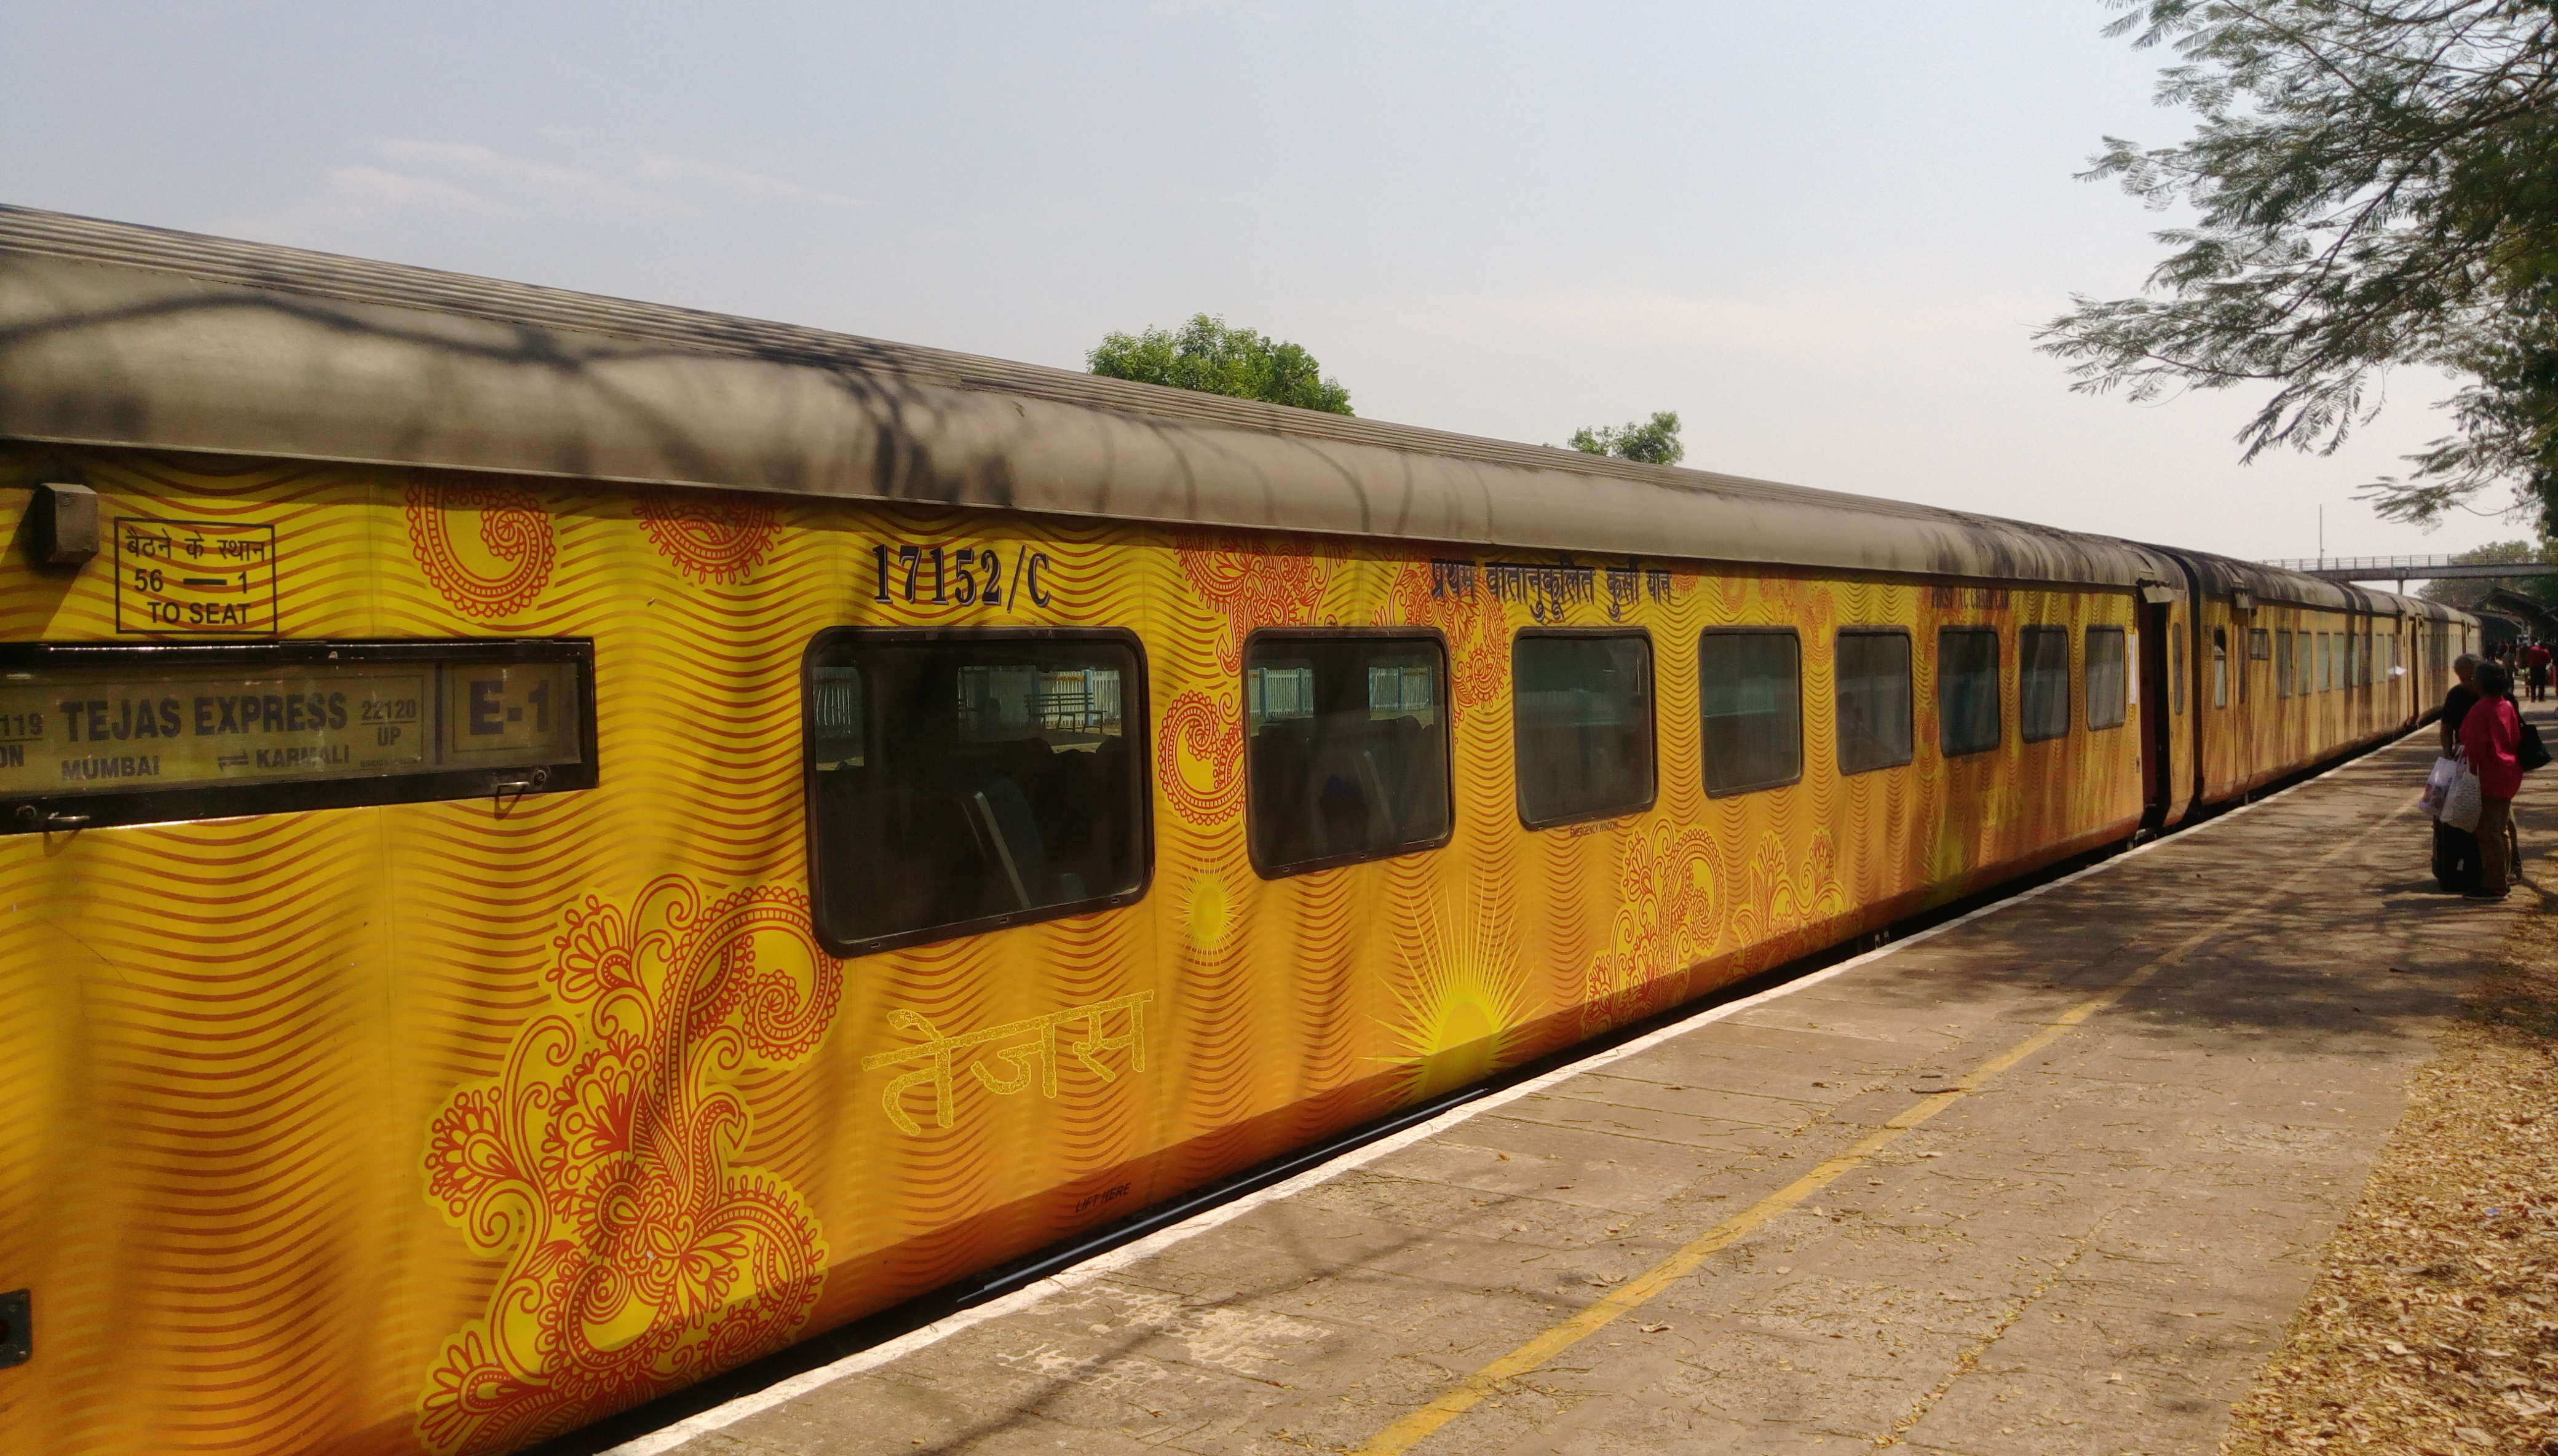 Tejas Express will charge for excess baggage from passengers